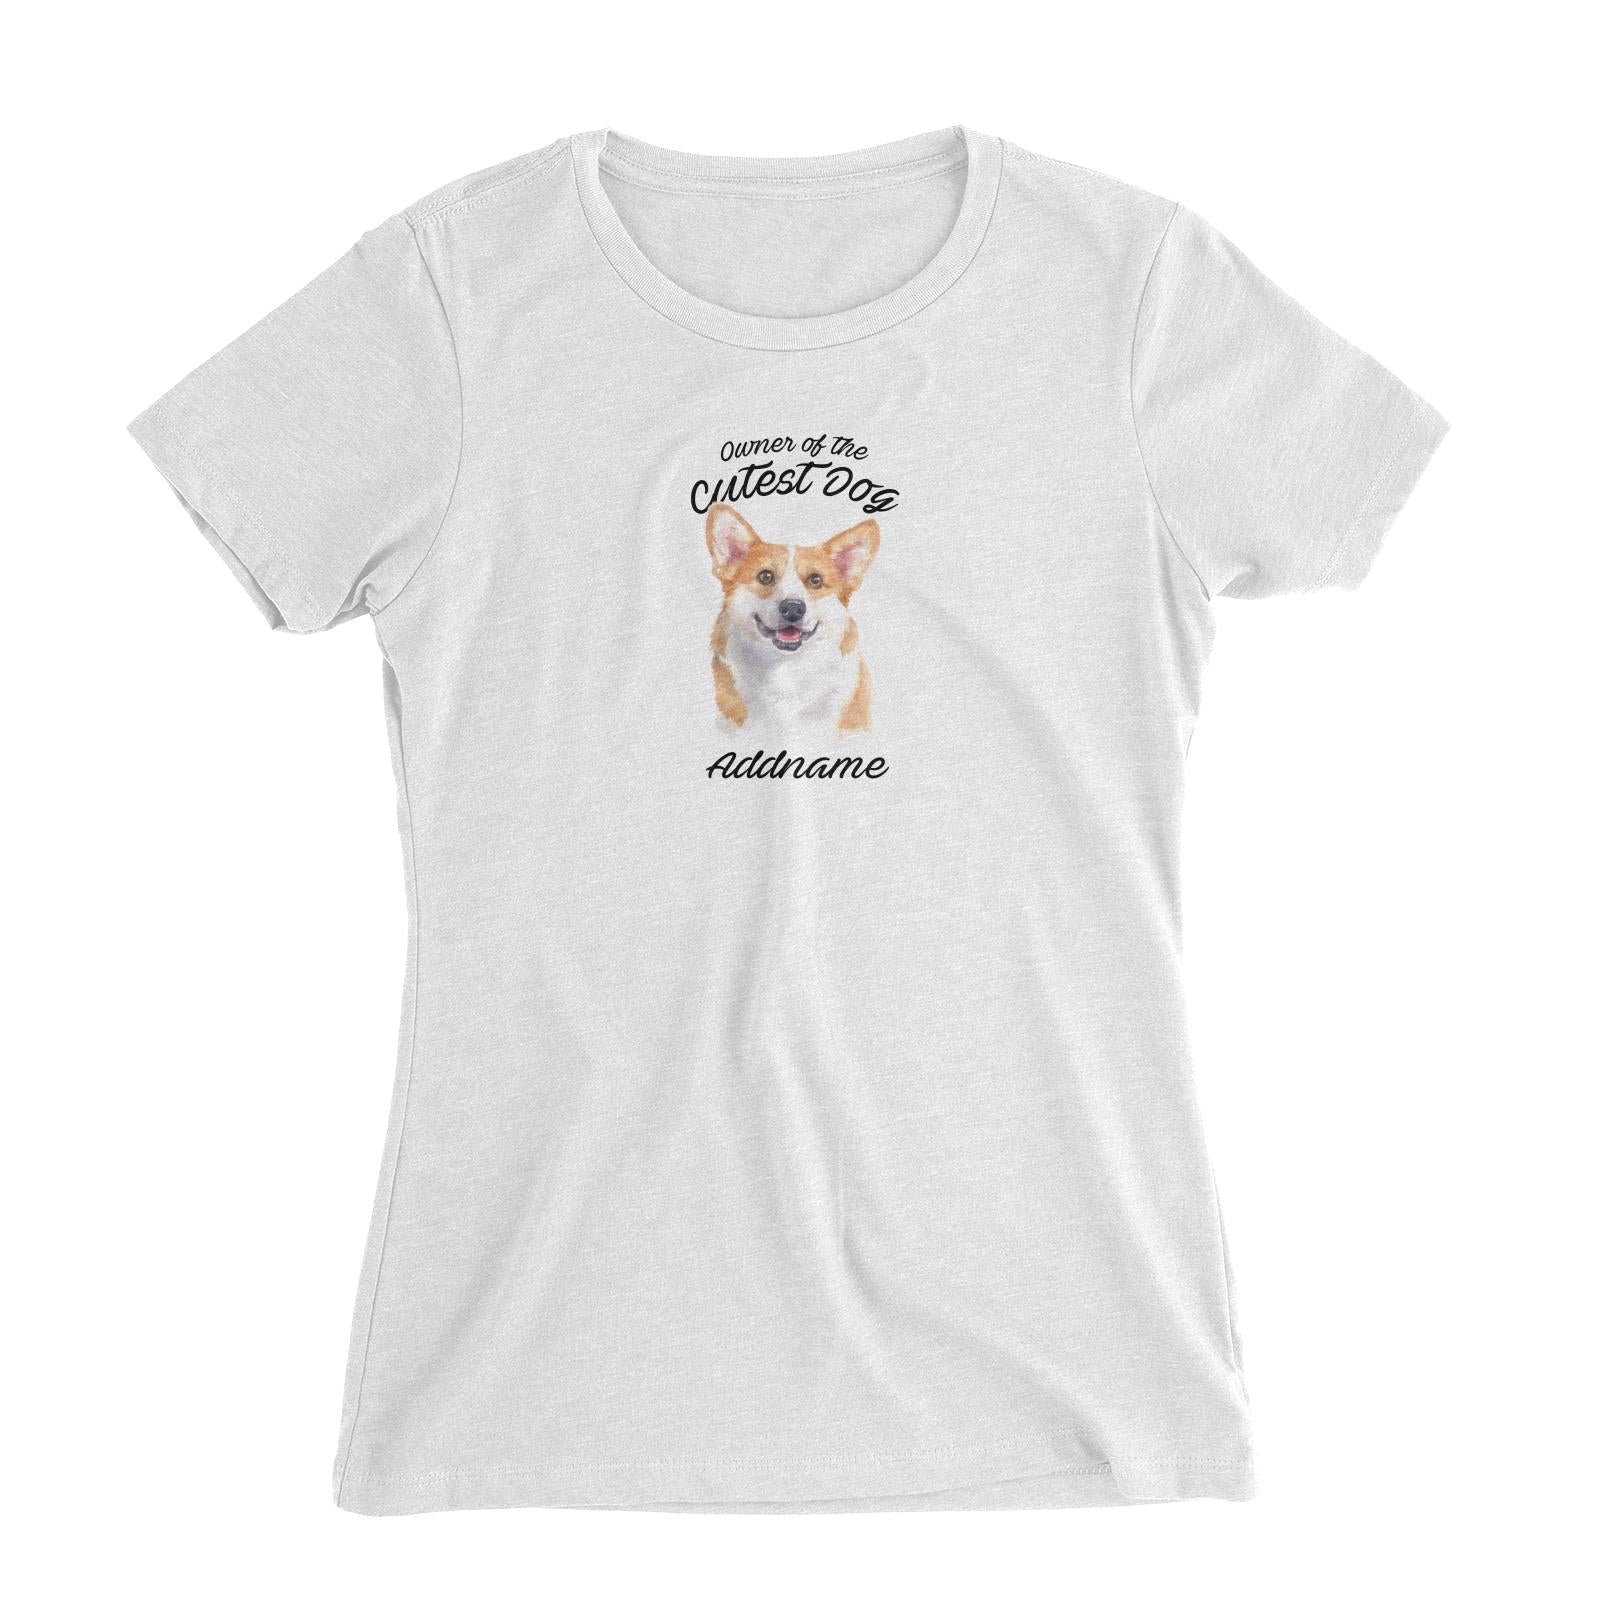 Watercolor Dog Owner Of The Cutest Dog Welsh Corgi Smile Addname Women's Slim Fit T-Shirt